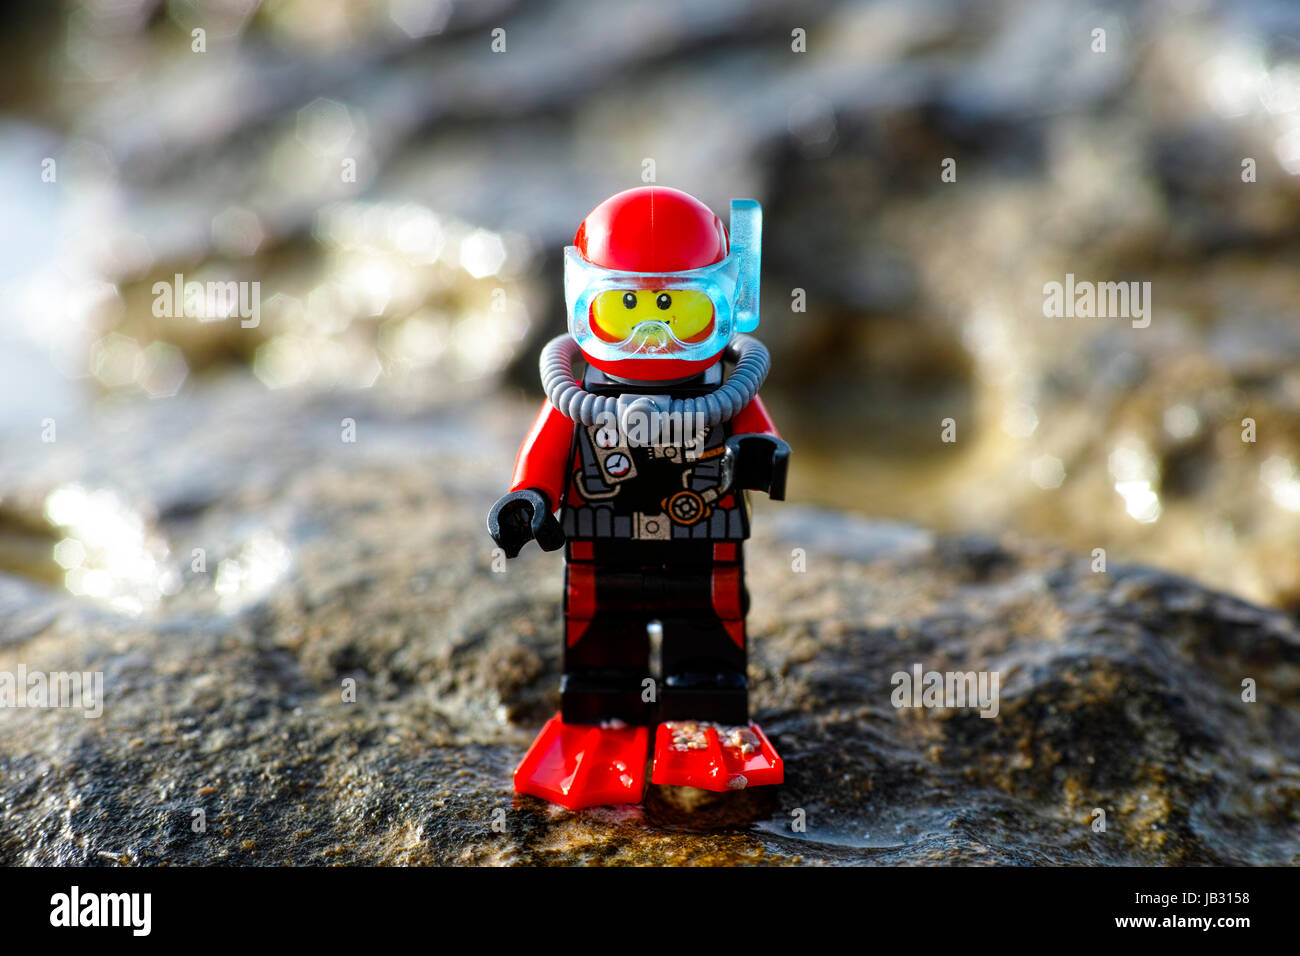 Paphos, Cyprus - October 09, 2016 Lego scuba diver minifigure standing on stone in sea. Stock Photo